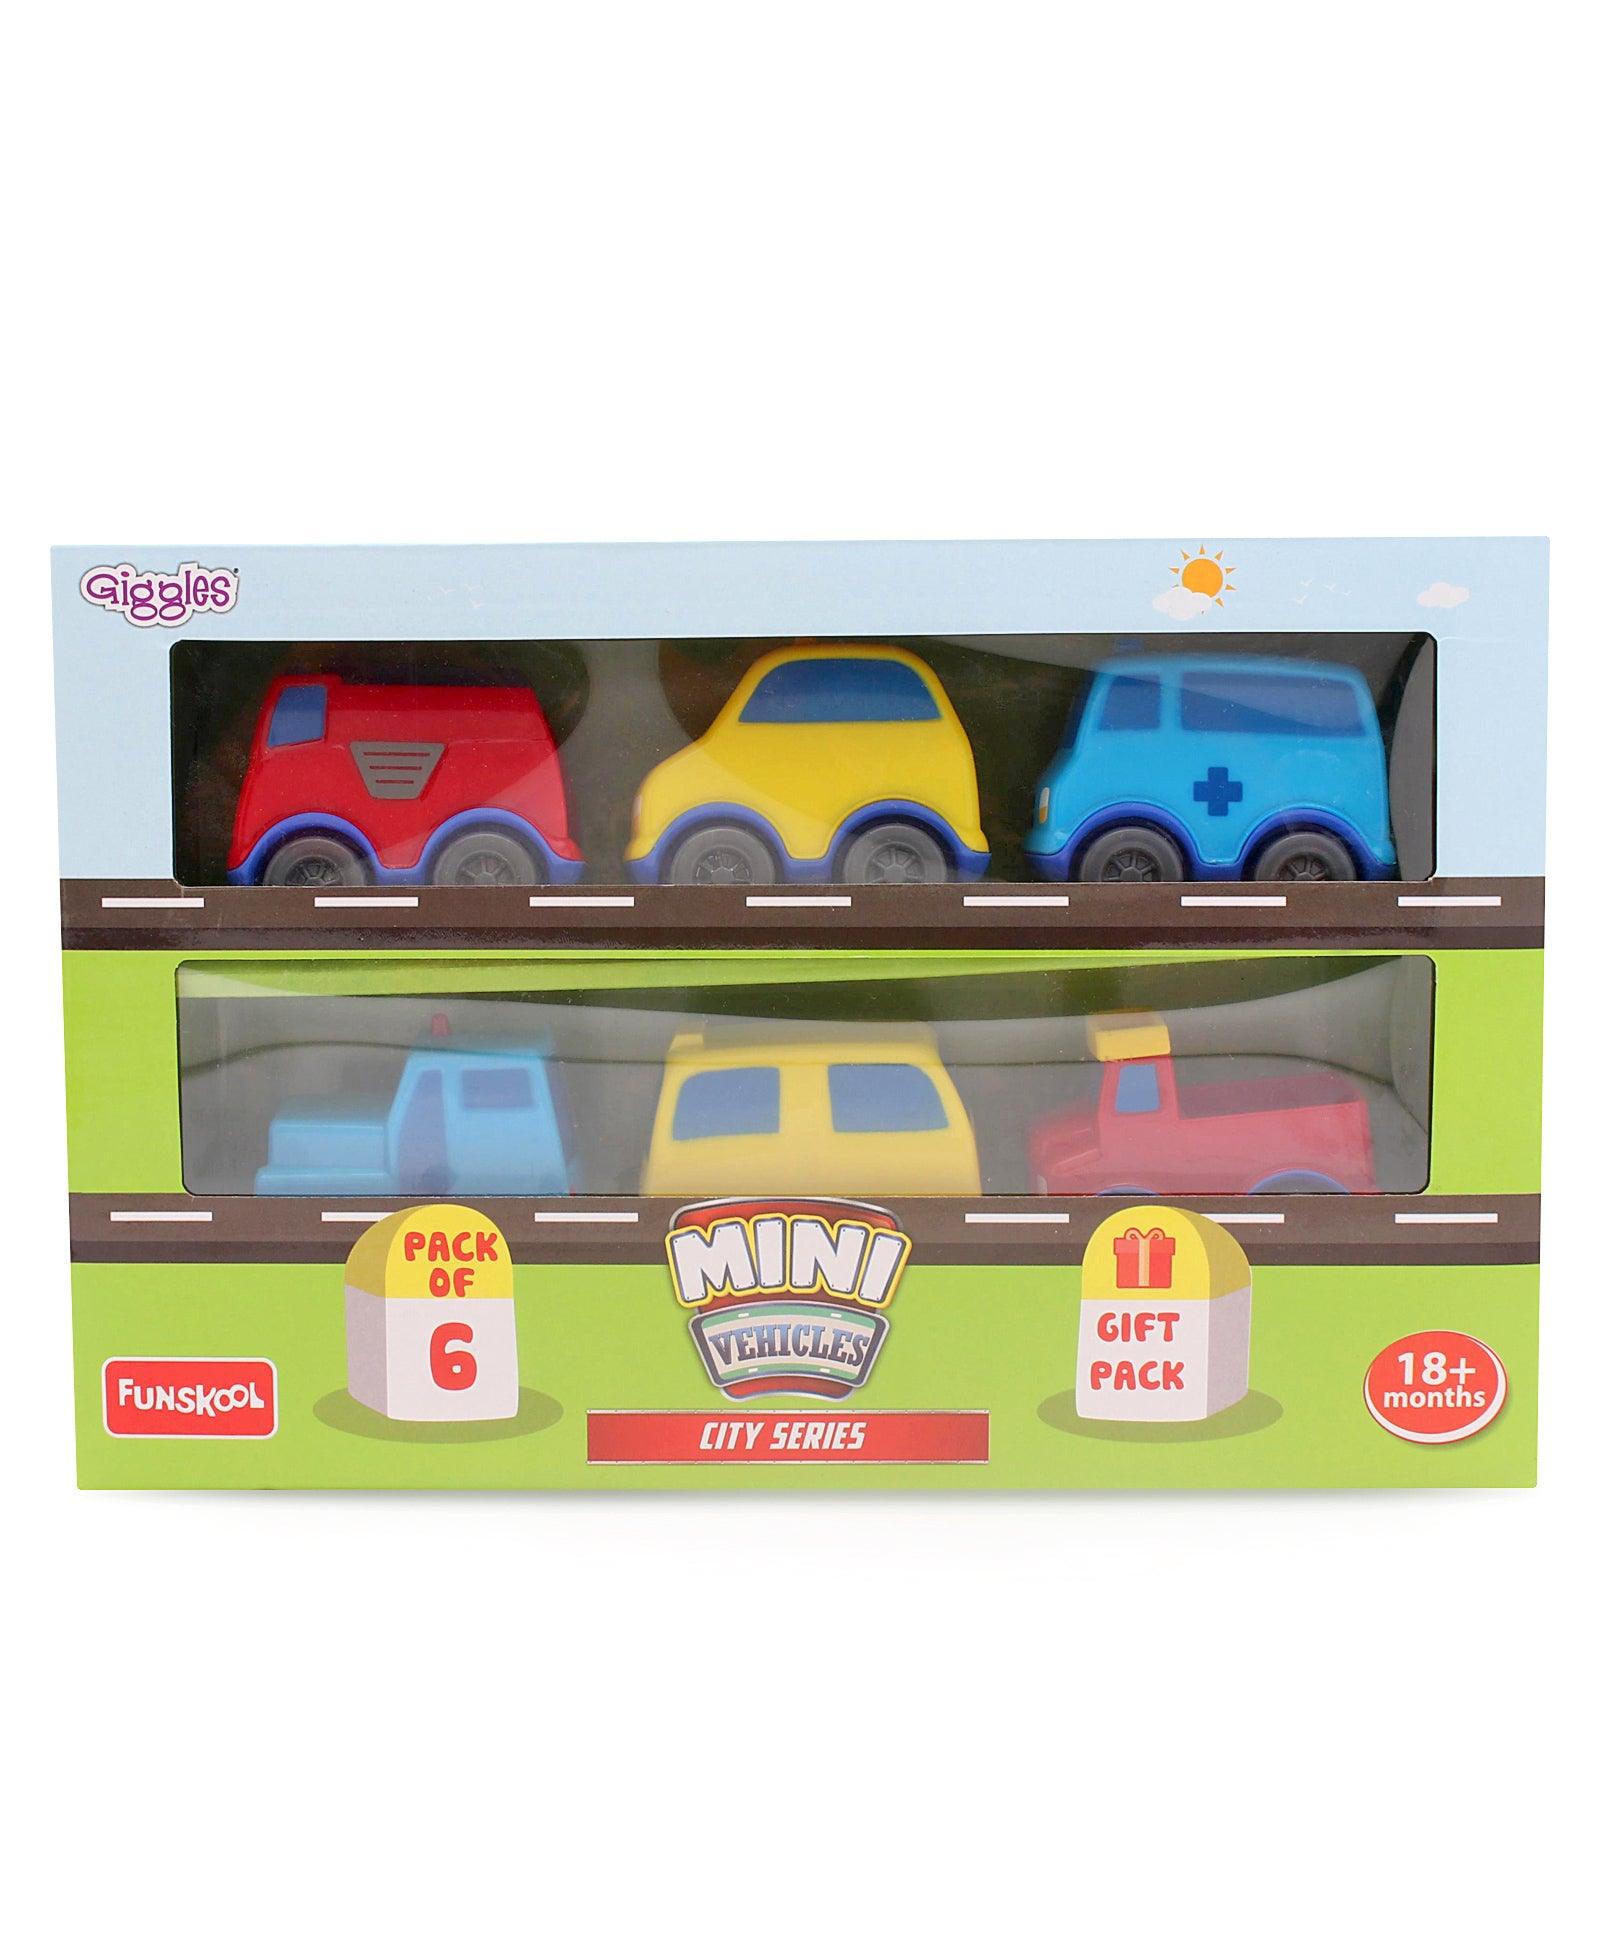 Funskool Giggles Mini Vehicle City Series Gift Pack of 6 for Ages 2+